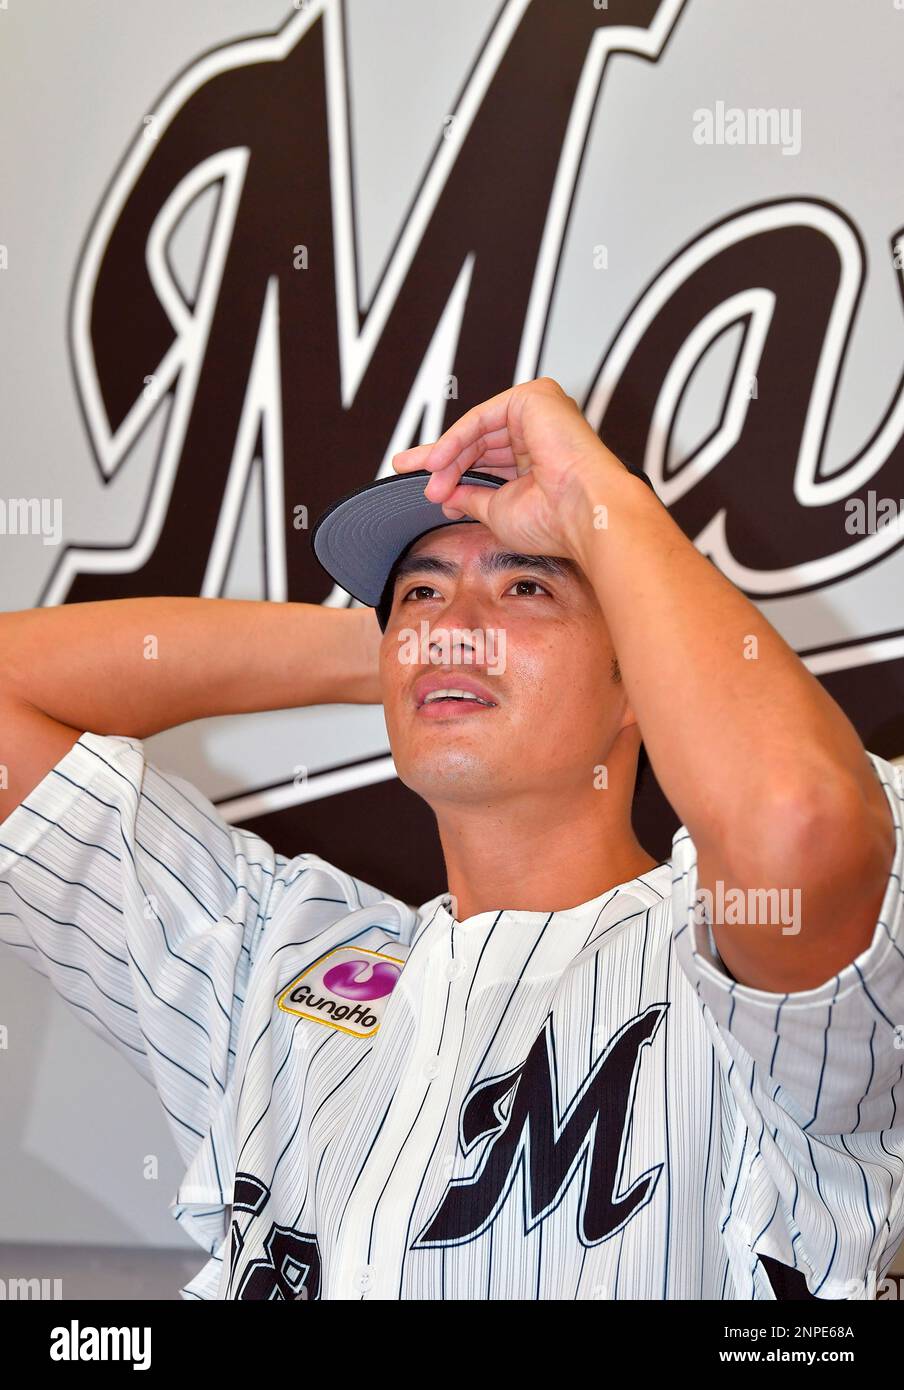 Wei-Yin Chen, a Taiwanese professional baseball pitcher, attends a press conference to announce joining the Chiba Lotte Marines in the Nippon Professional Baseball (NPB) at ZOZO Marine Stadium in Chiba on October